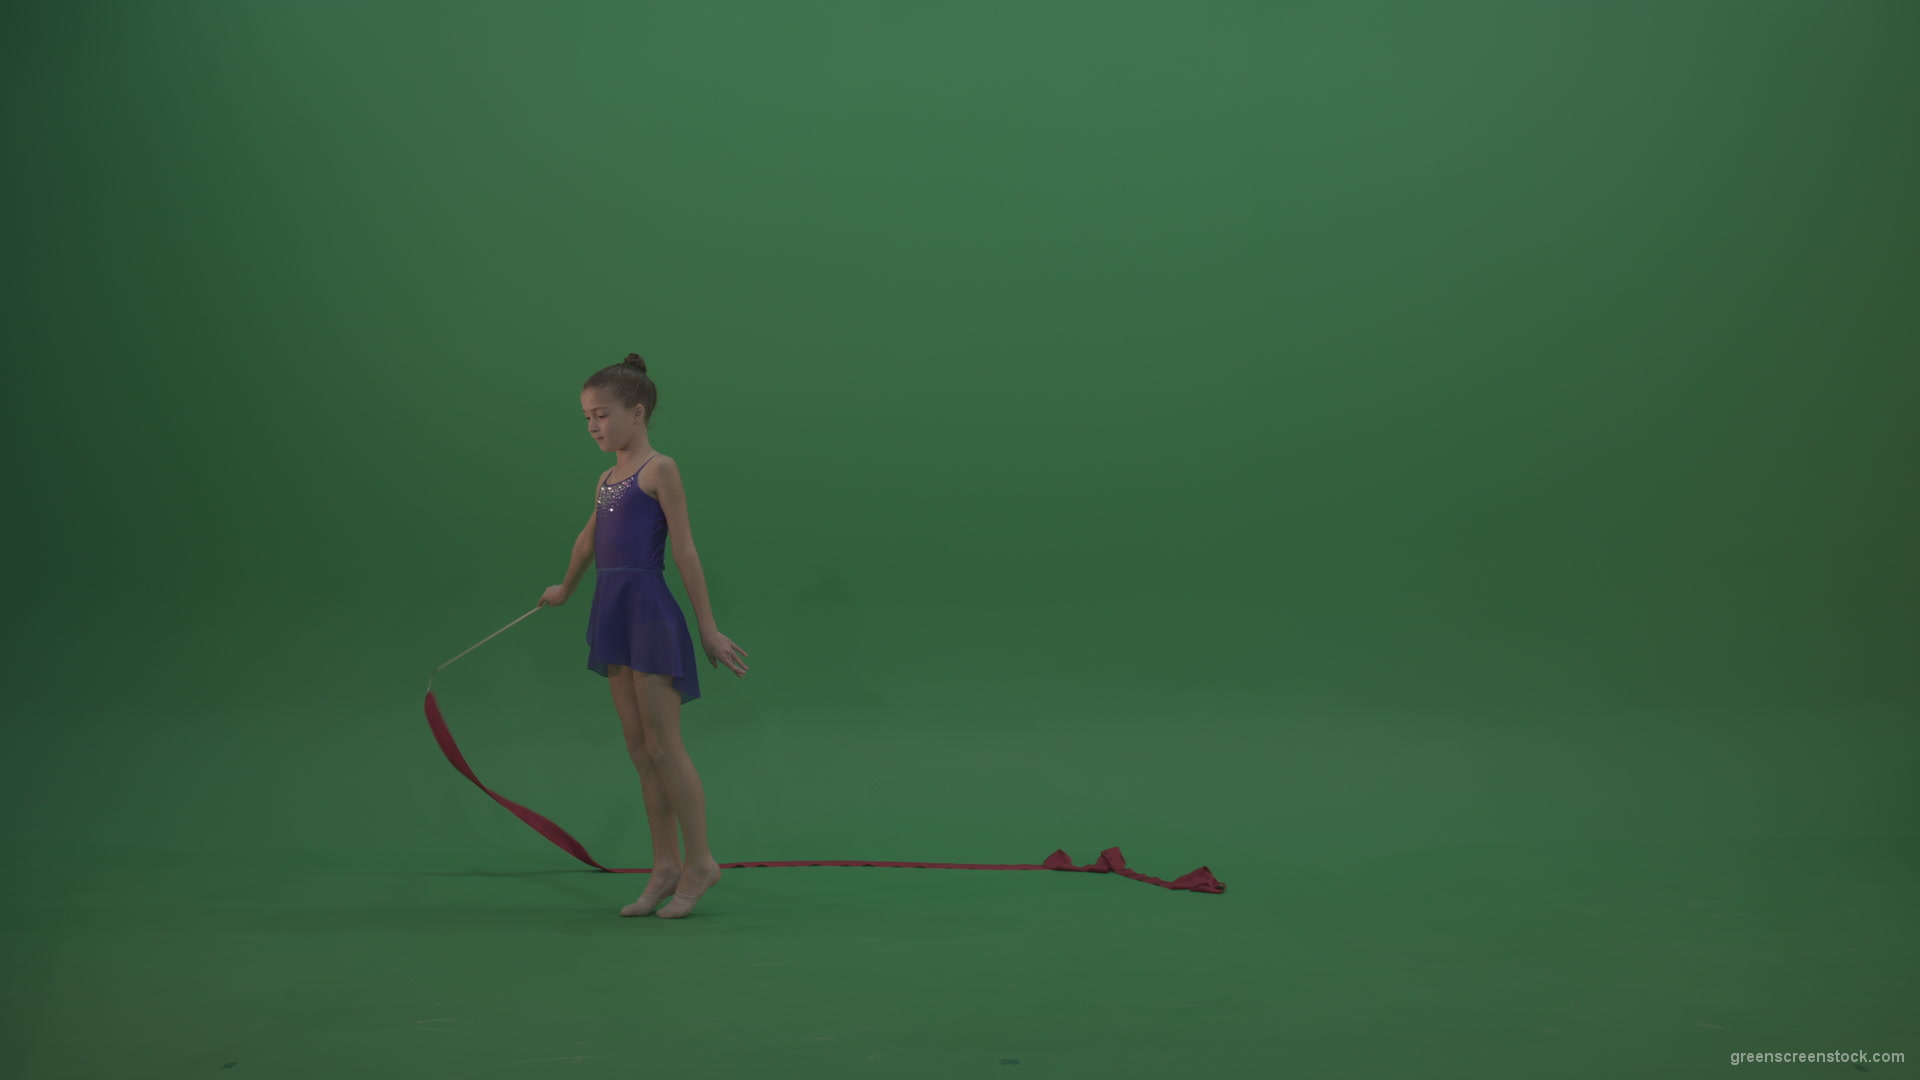 Young_Female_Acrobat_Gymnast_Performing_Acro_Dance_Using_Red_Long_Ribbon_On_Green_Screen_Wall_Chroma_Key_Background_008 Green Screen Stock